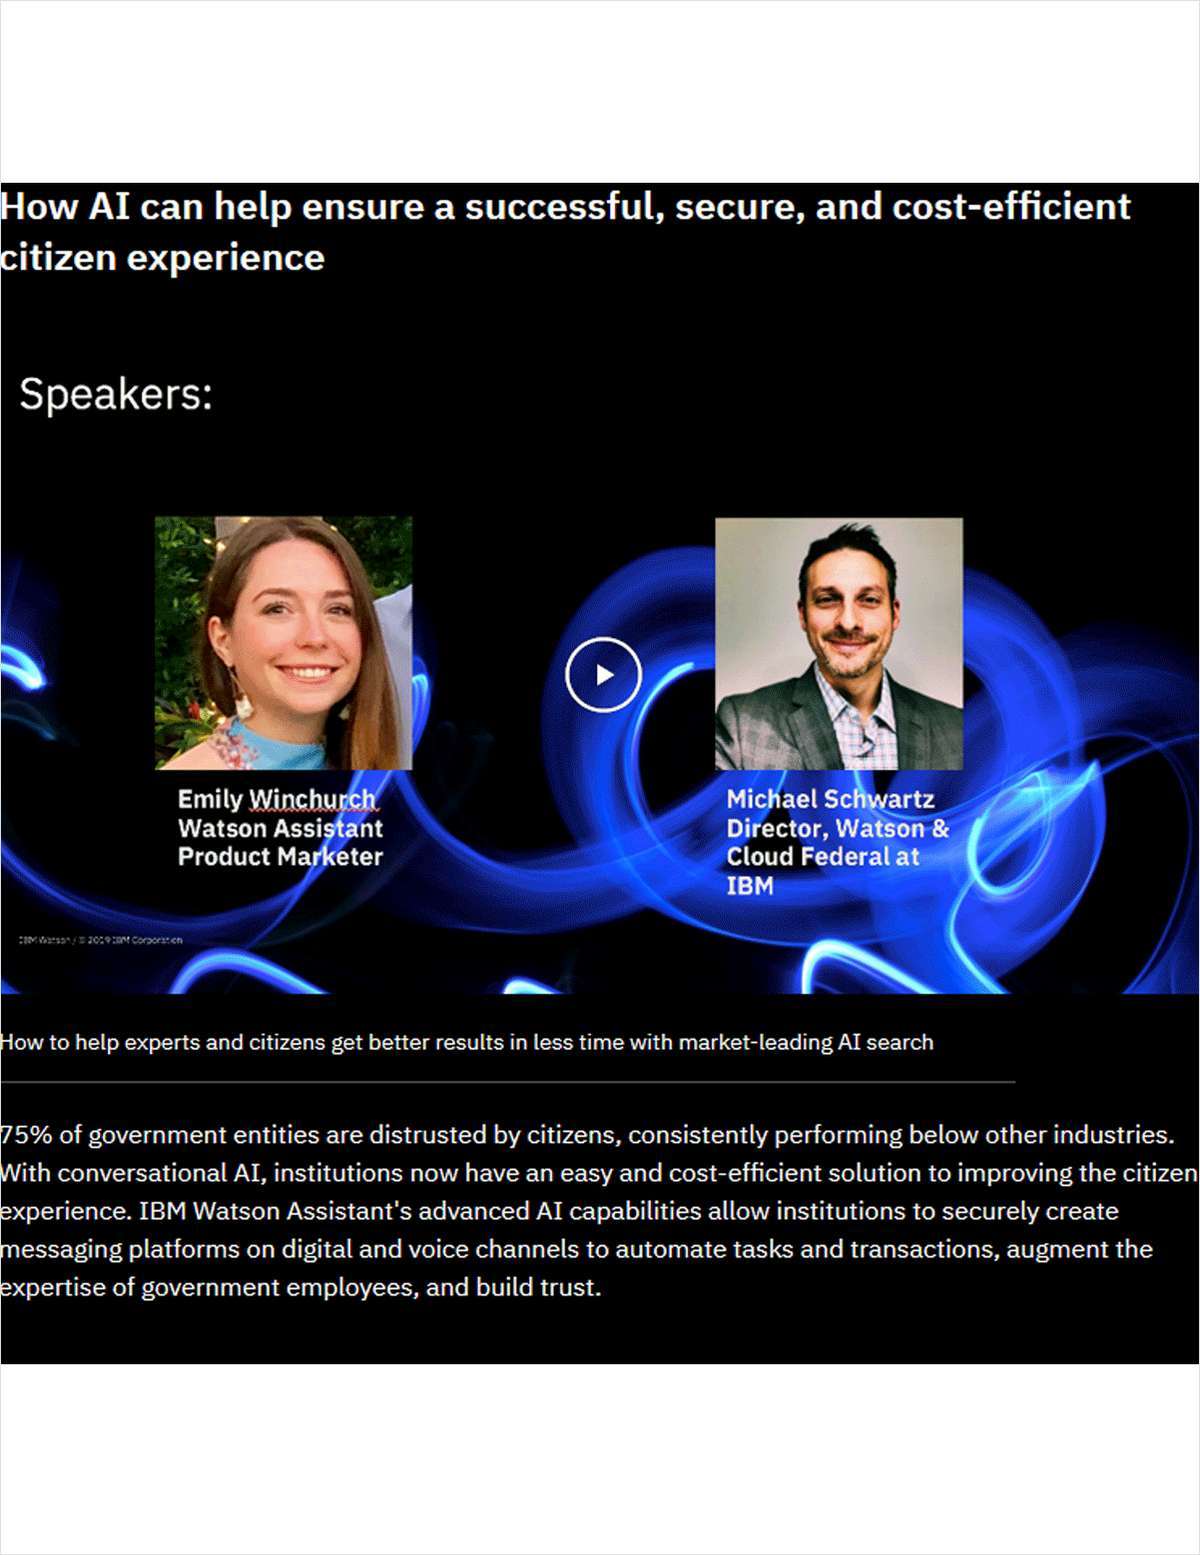 How AI can help ensure a successful, secure, and cost-efficient citizen experience